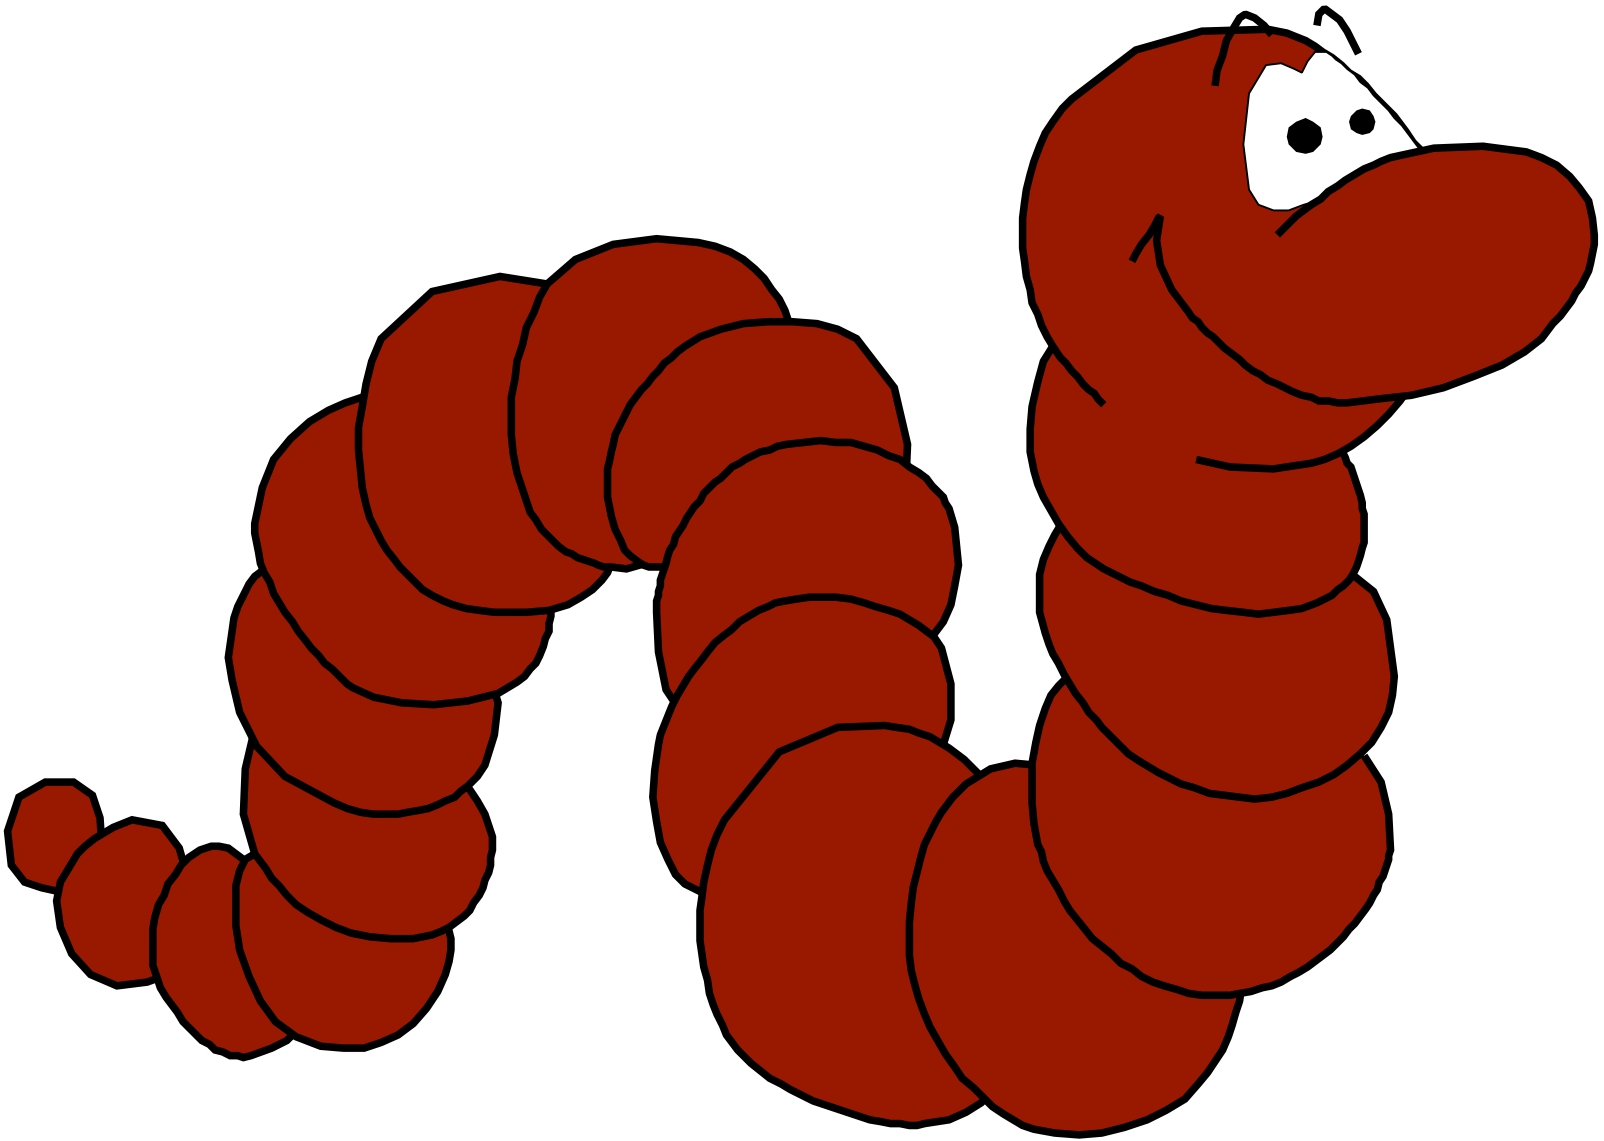 Free cartoon images download. Worm clipart comic